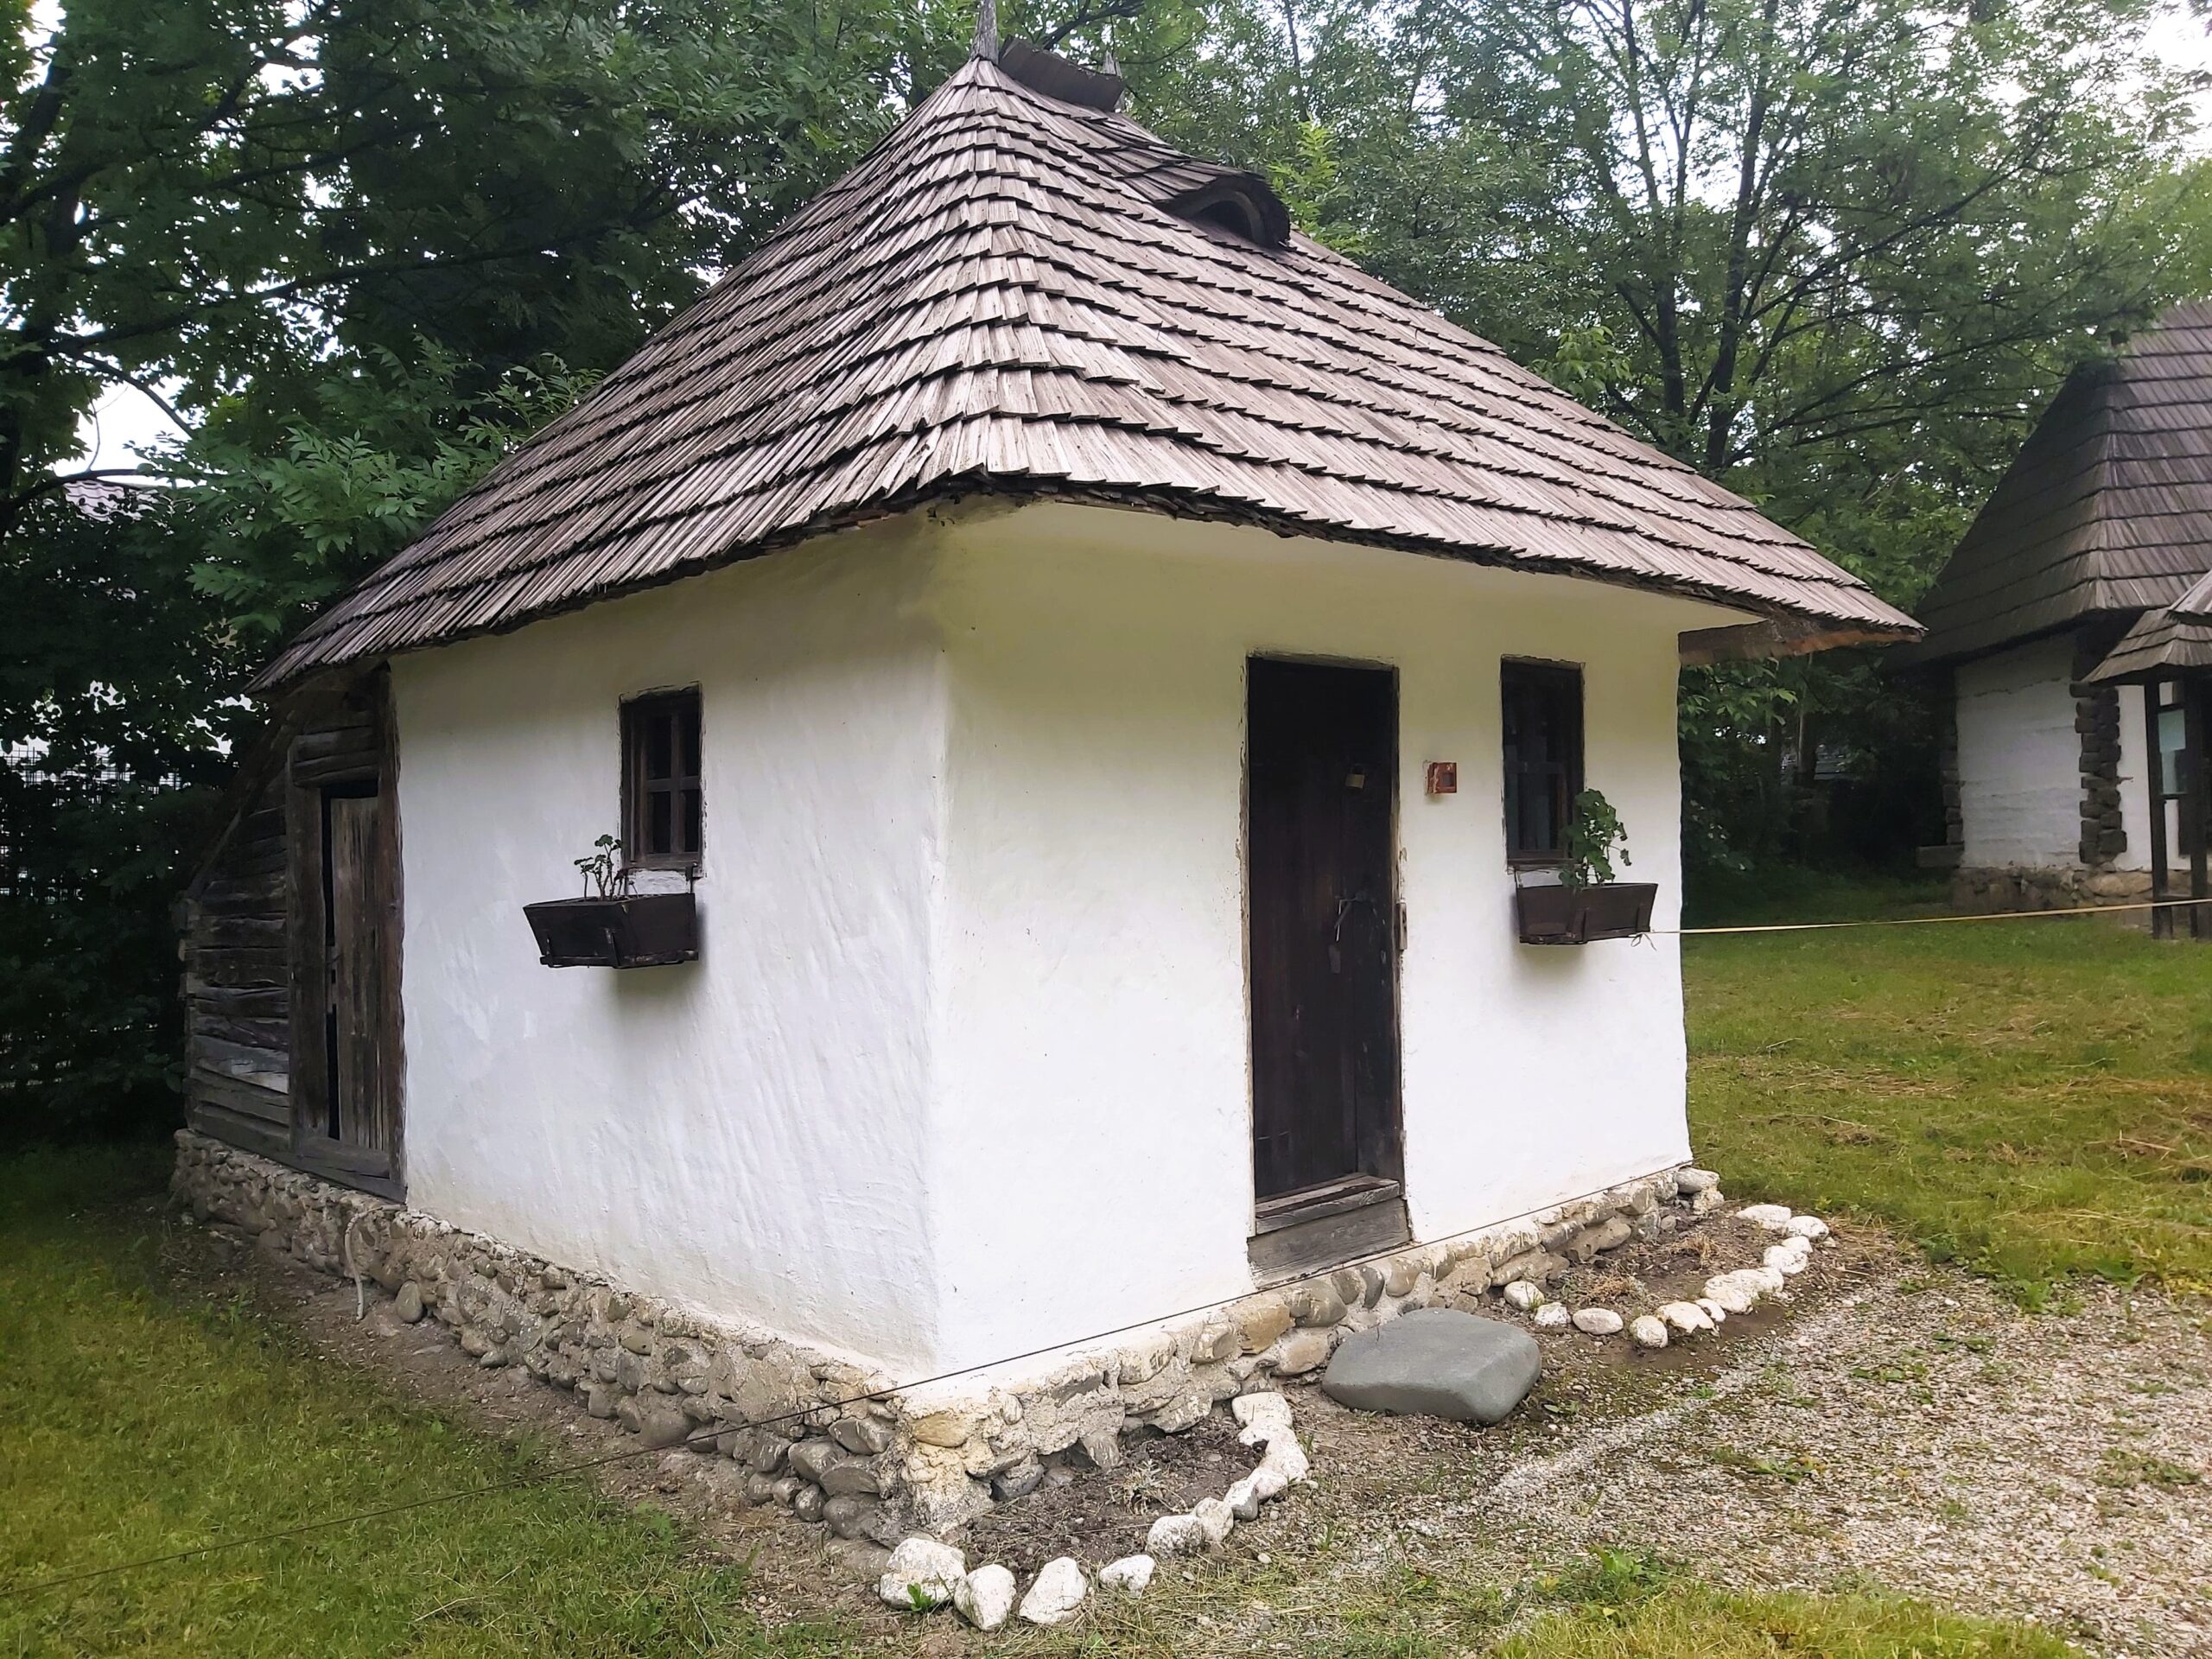 An old reconstructed white house in Bran, Romania